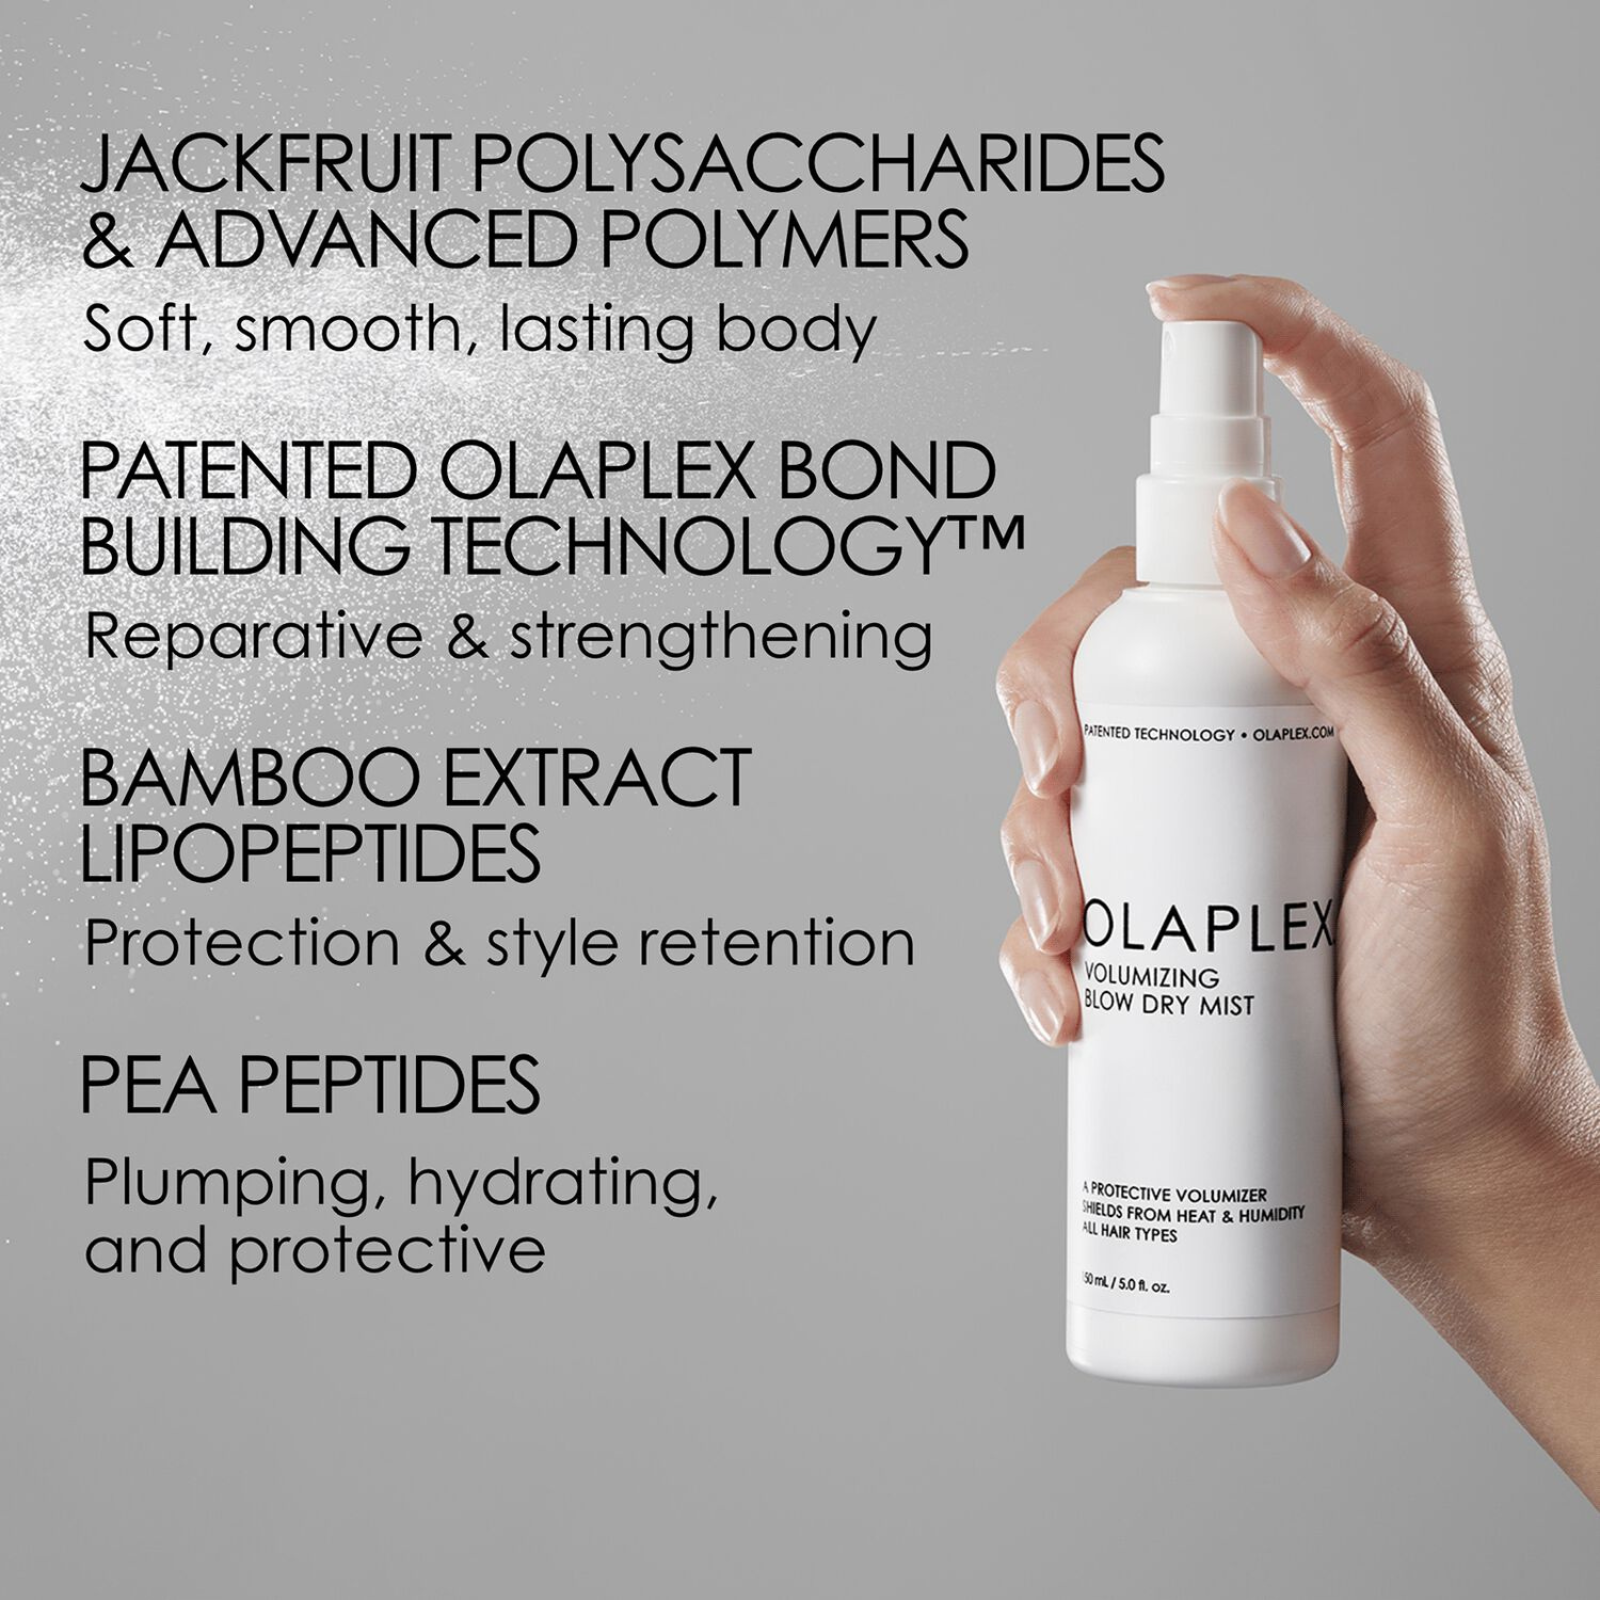 Jackfruit Polysaccharides & advanced polymers - Create soft, smooth blowouts with lasting body. No stiff, sticky hair. Patented OLAPLEX Bond Building Technology™ - Repairs damaged hair bonds for stronger, healthier-looking hair. Bamboo Extract Lipopeptides - Act as a scaffolding to protect hair from damage & promote style retention. Pea Peptides - Plump, hydrate, provide antioxidant protection to fight free radicals.